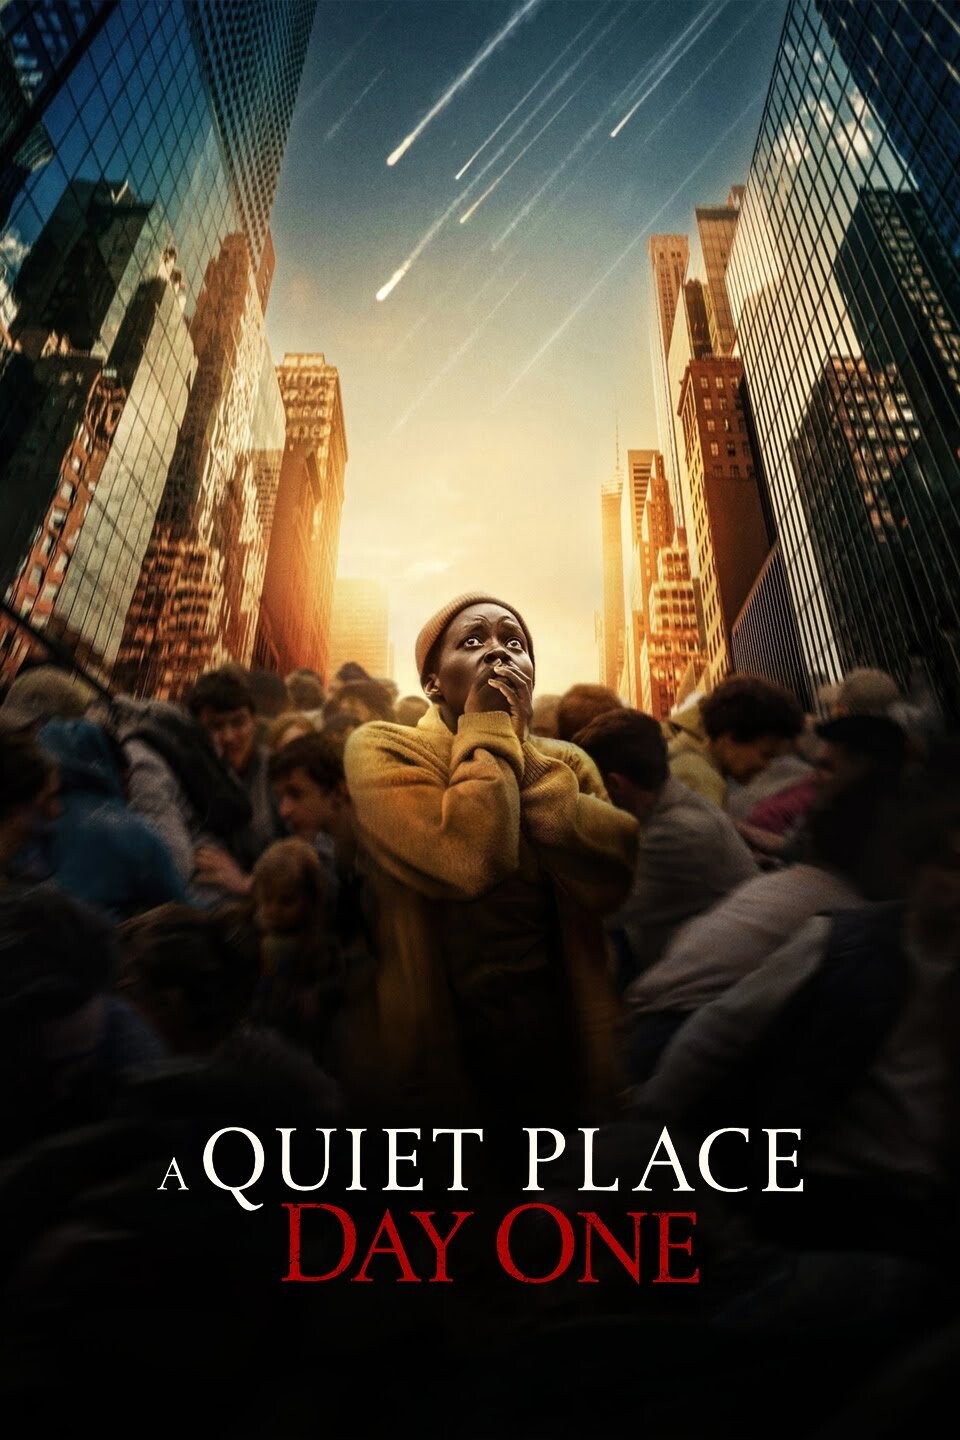 A Quiet Place: Day One | Coming Soon